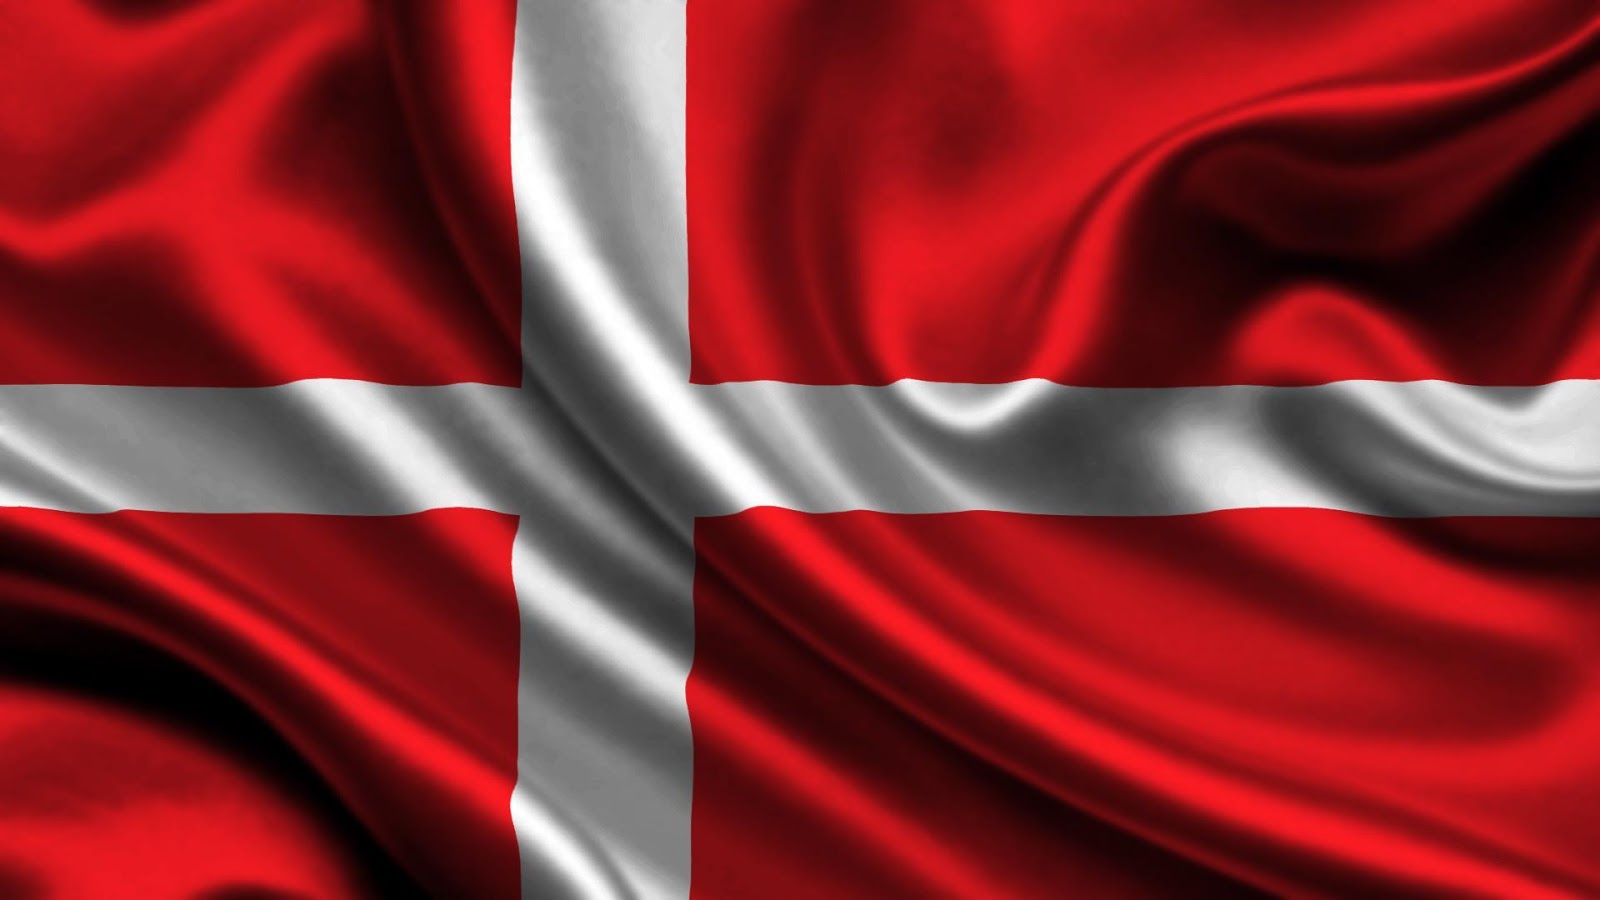 great-news-denmark-is-cutting-the-tax-rate-on-new-cars-to-100-percent